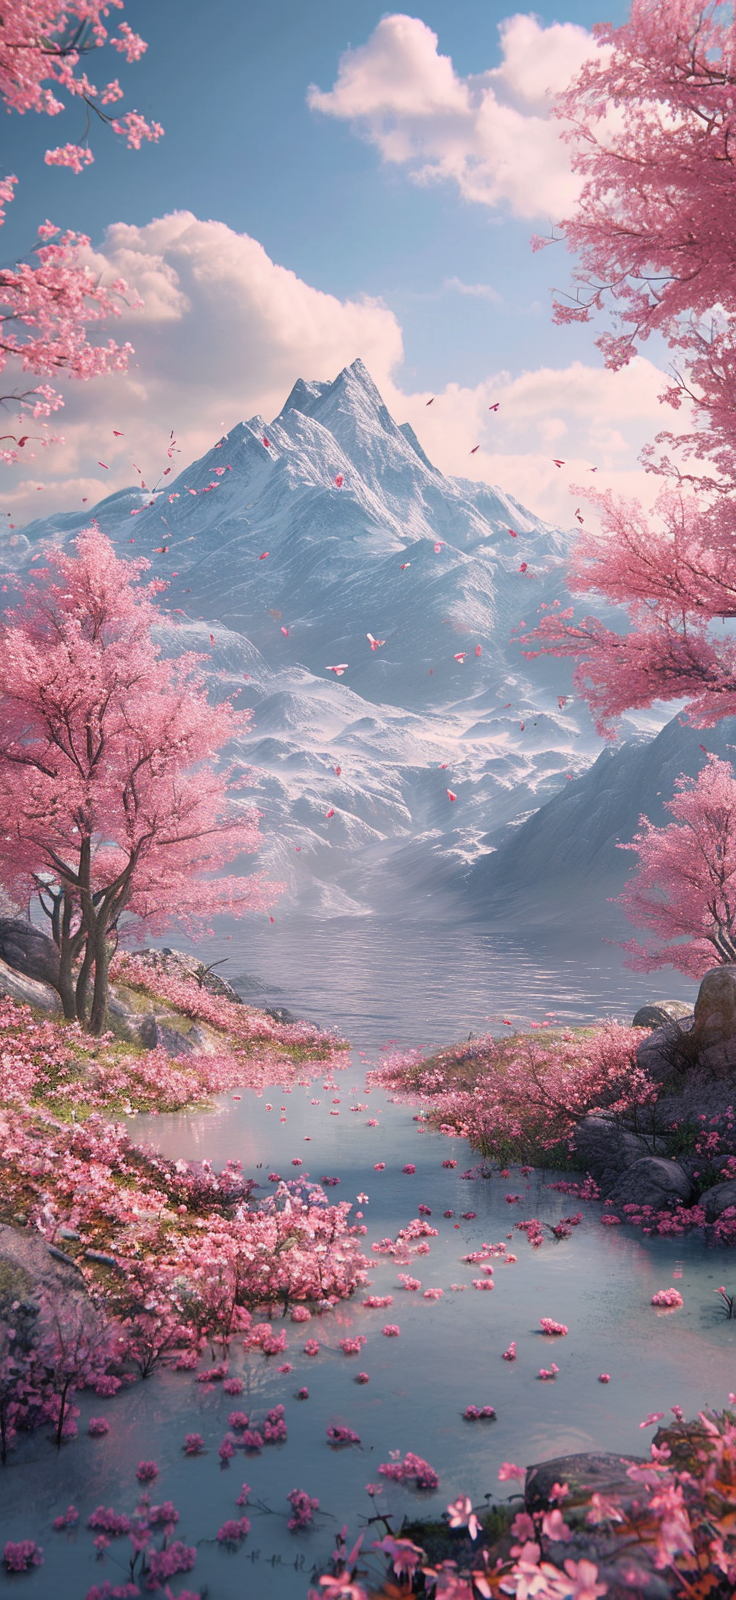 Bask in the breathtaking beauty of springtime with this captivating mobile wallpaper